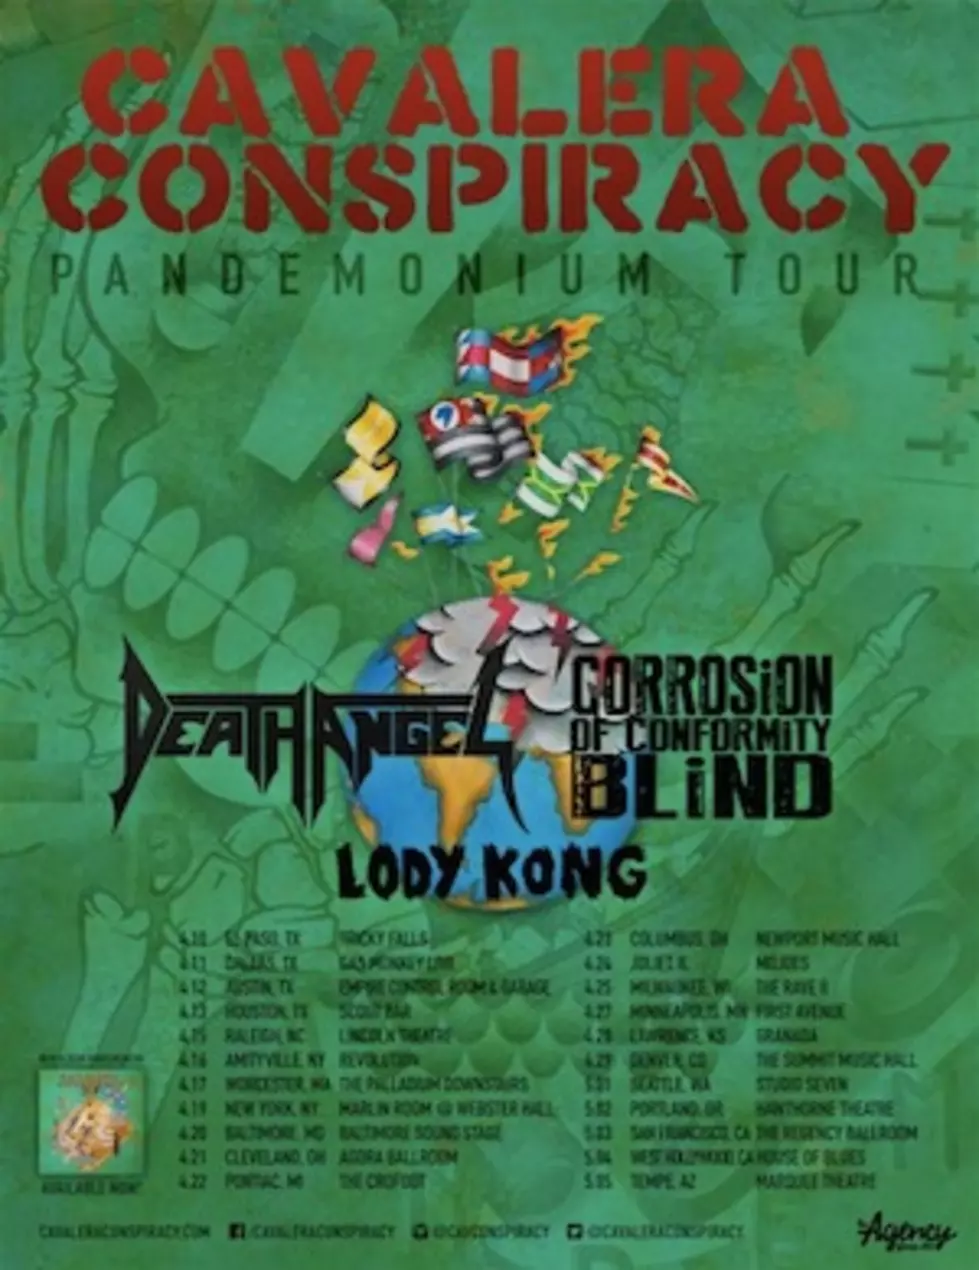 Cavalera Conspiracy to Embark on Spring U.S. Tour With Death Angel, C.O.C + Lody Kong